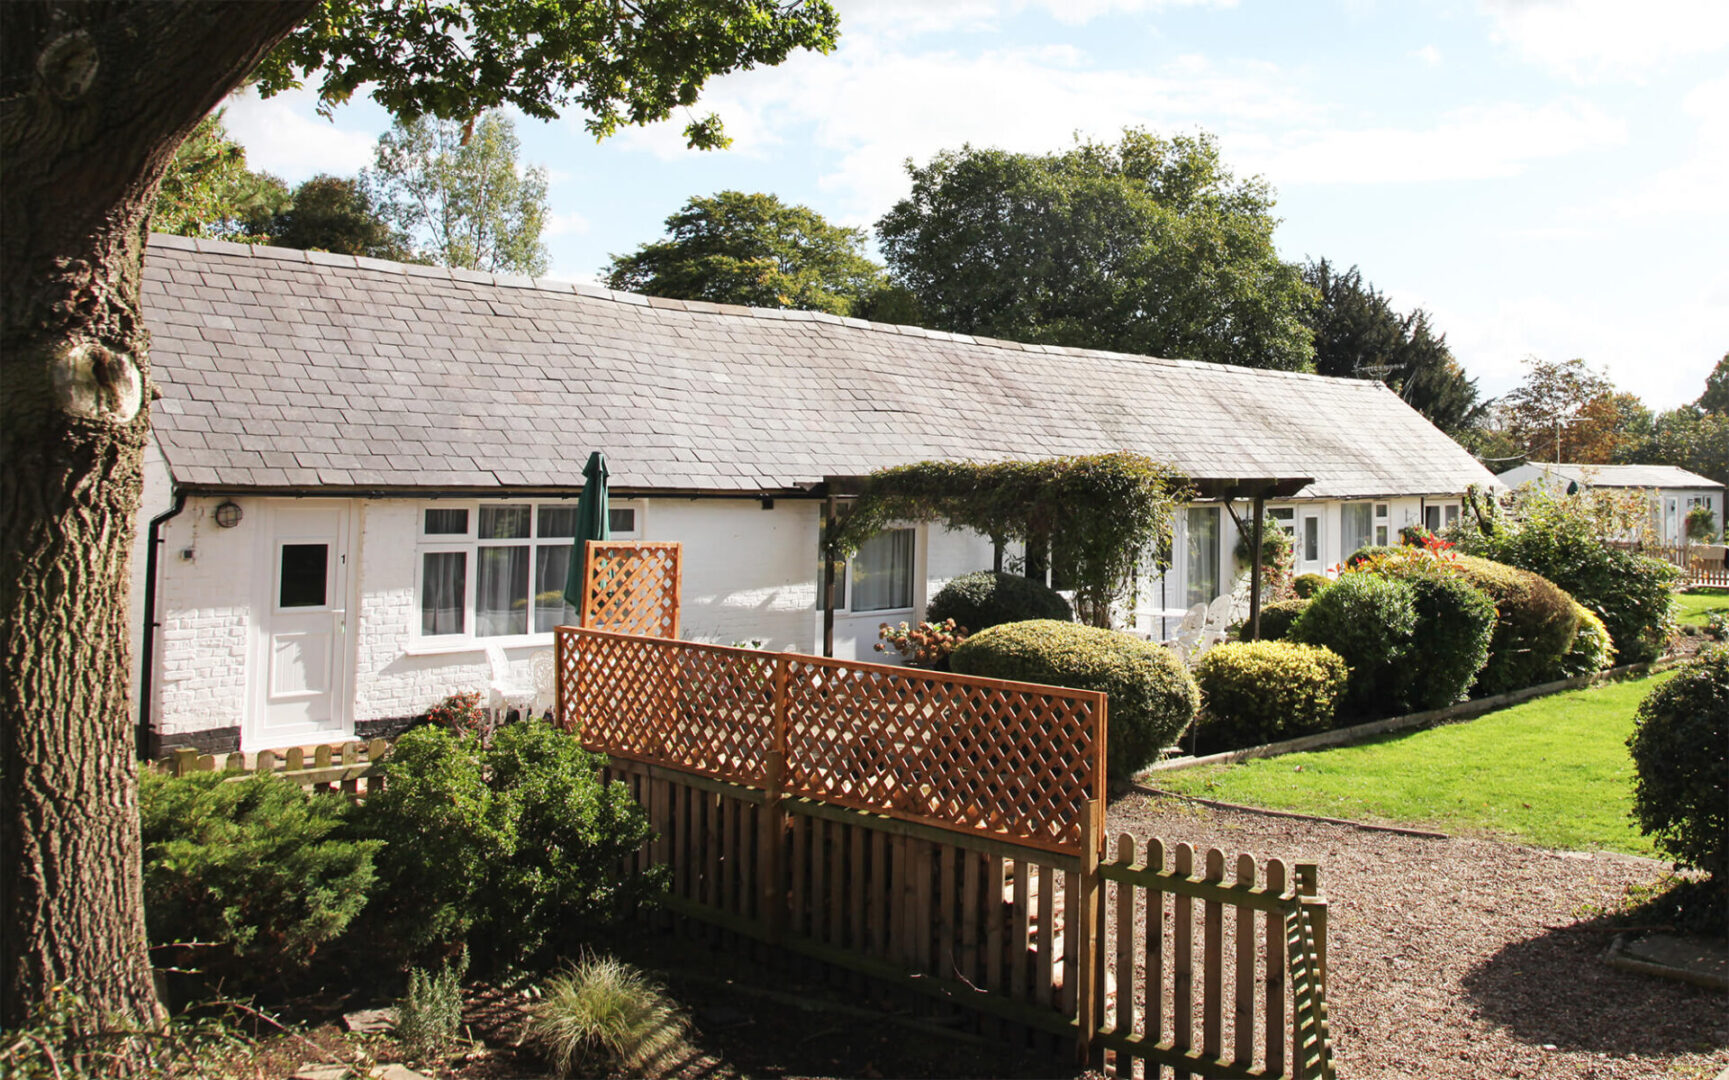 Book Countryside Accommodation | Sheephouse Manor Cottages Ready to experience the charm of Sheephouse Manor Cottages? Book your stay now and experience a memorable stay in our luxurious, self-catered accommodation.